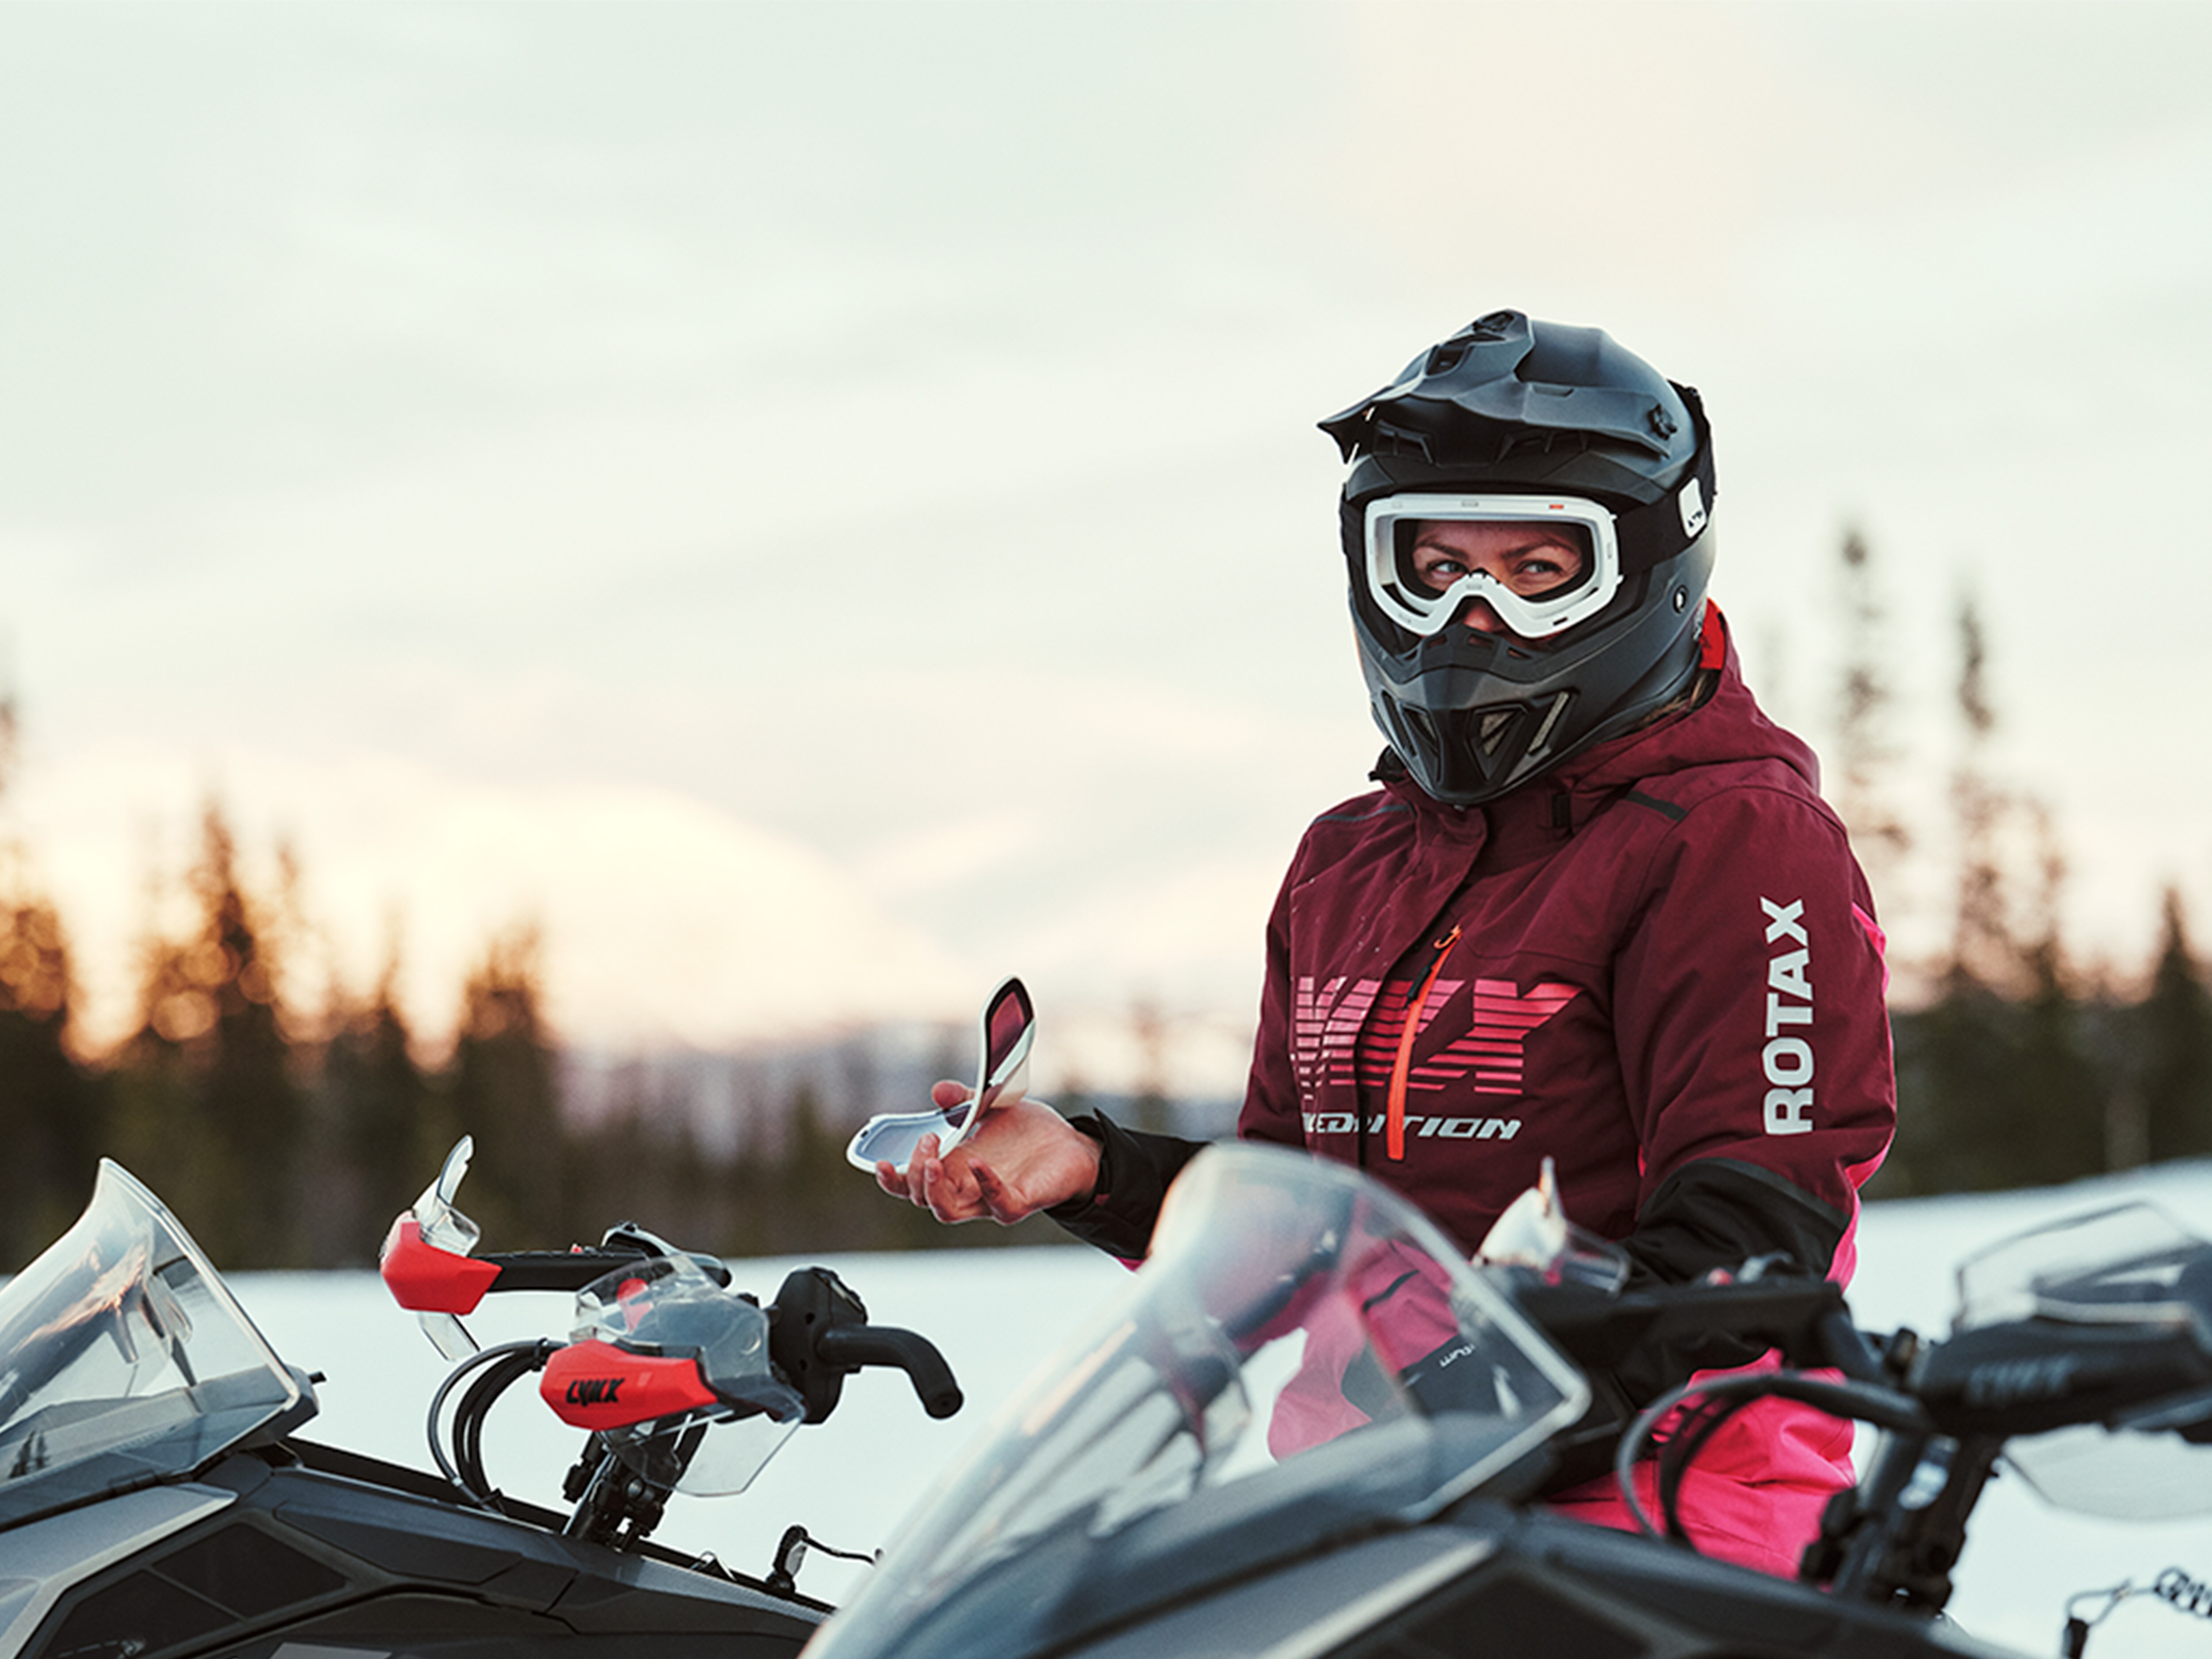 Riding with women